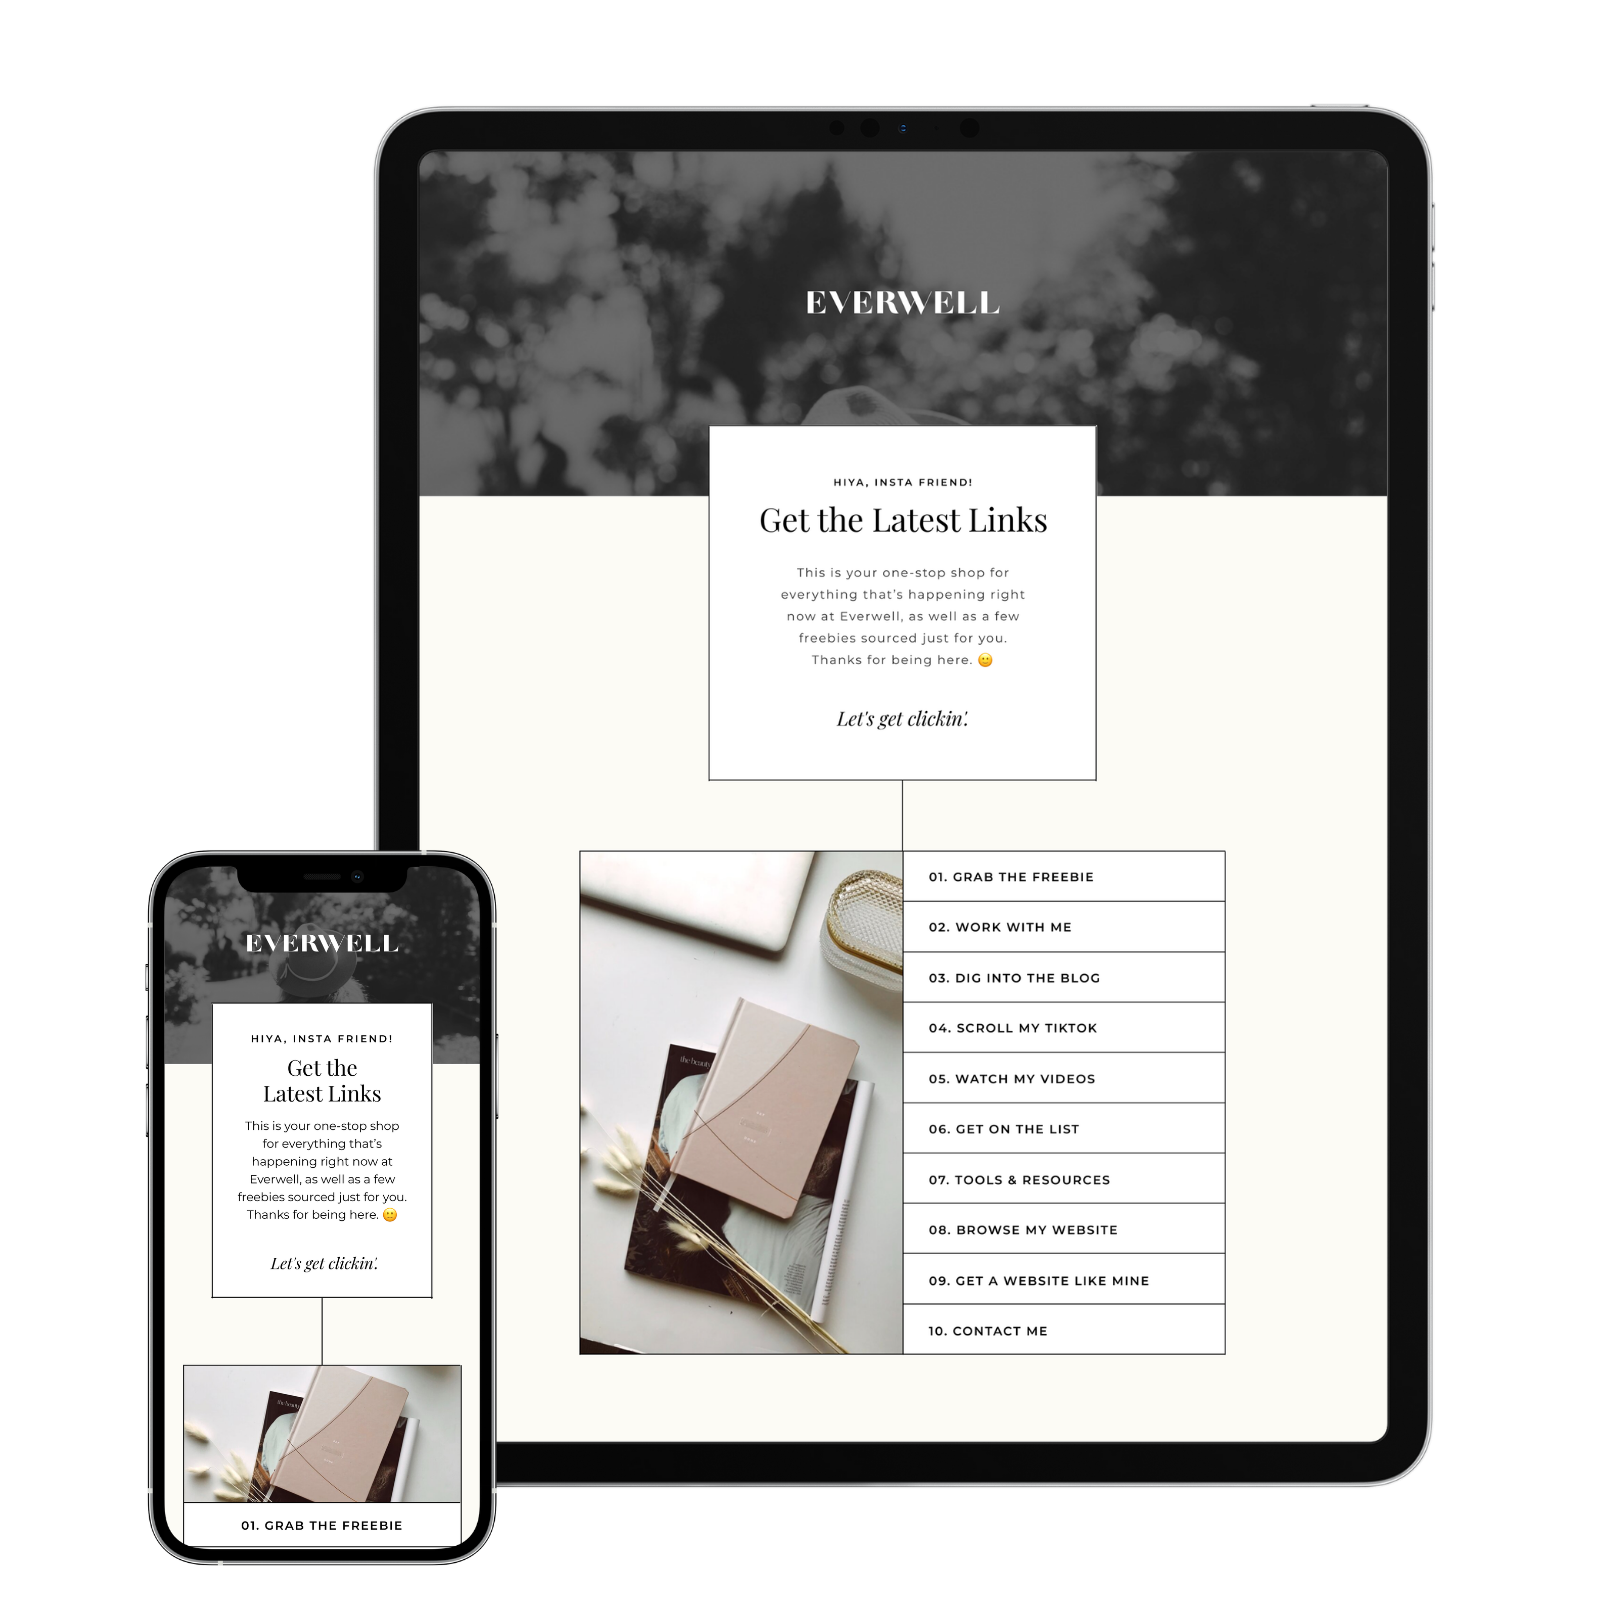 Everwell Showit Website Instagram Bio Links Page Template mockup iPad and iPhone